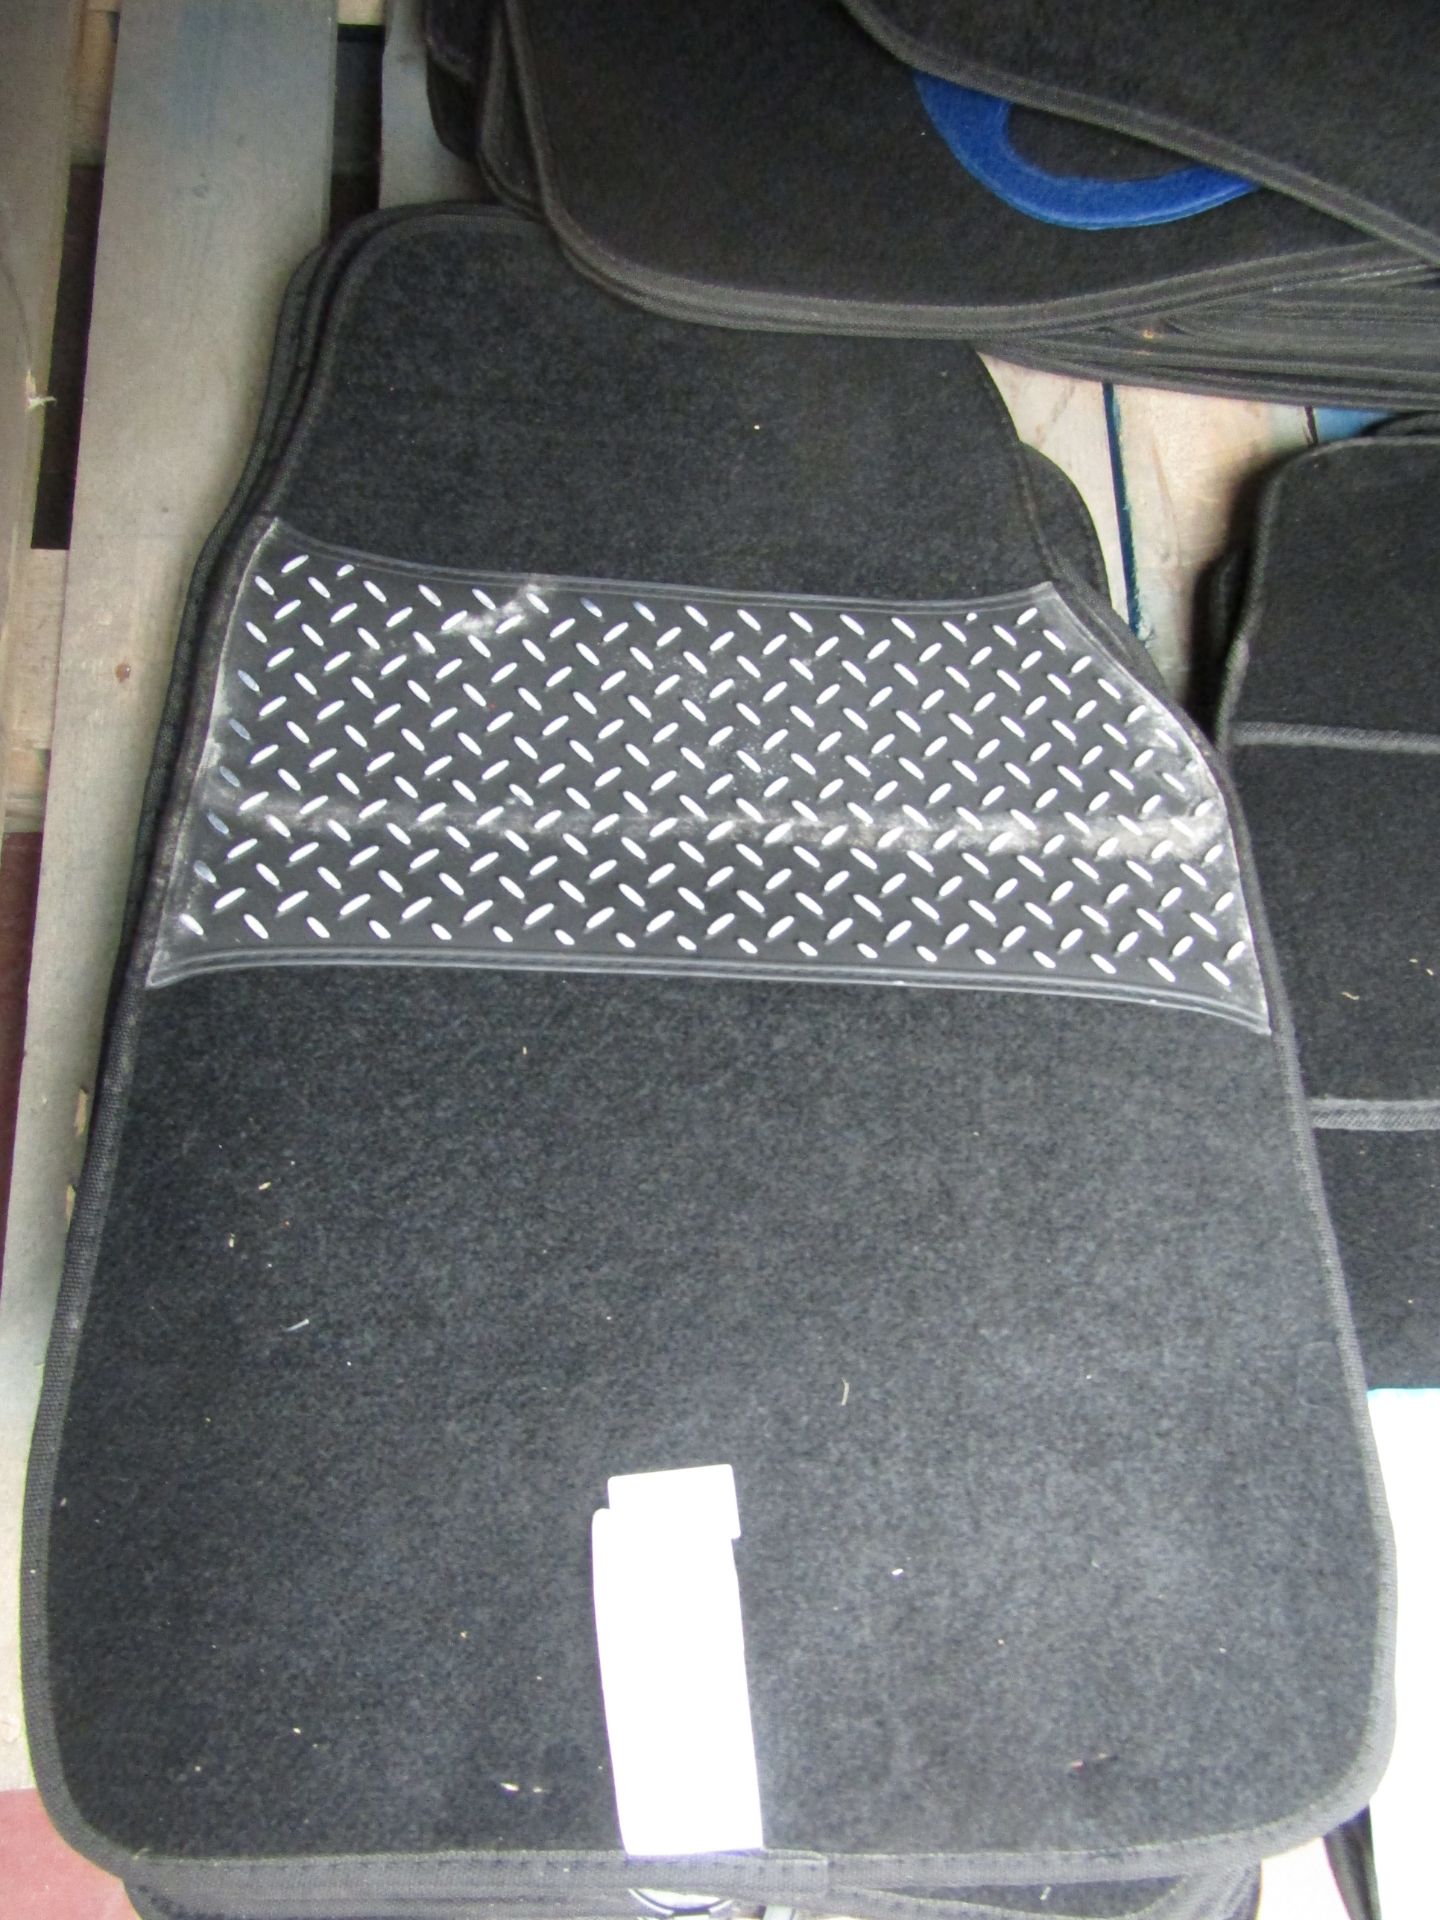 full set of 4 Streetwise Universal Upholstered car mats with rubber heel patch, new